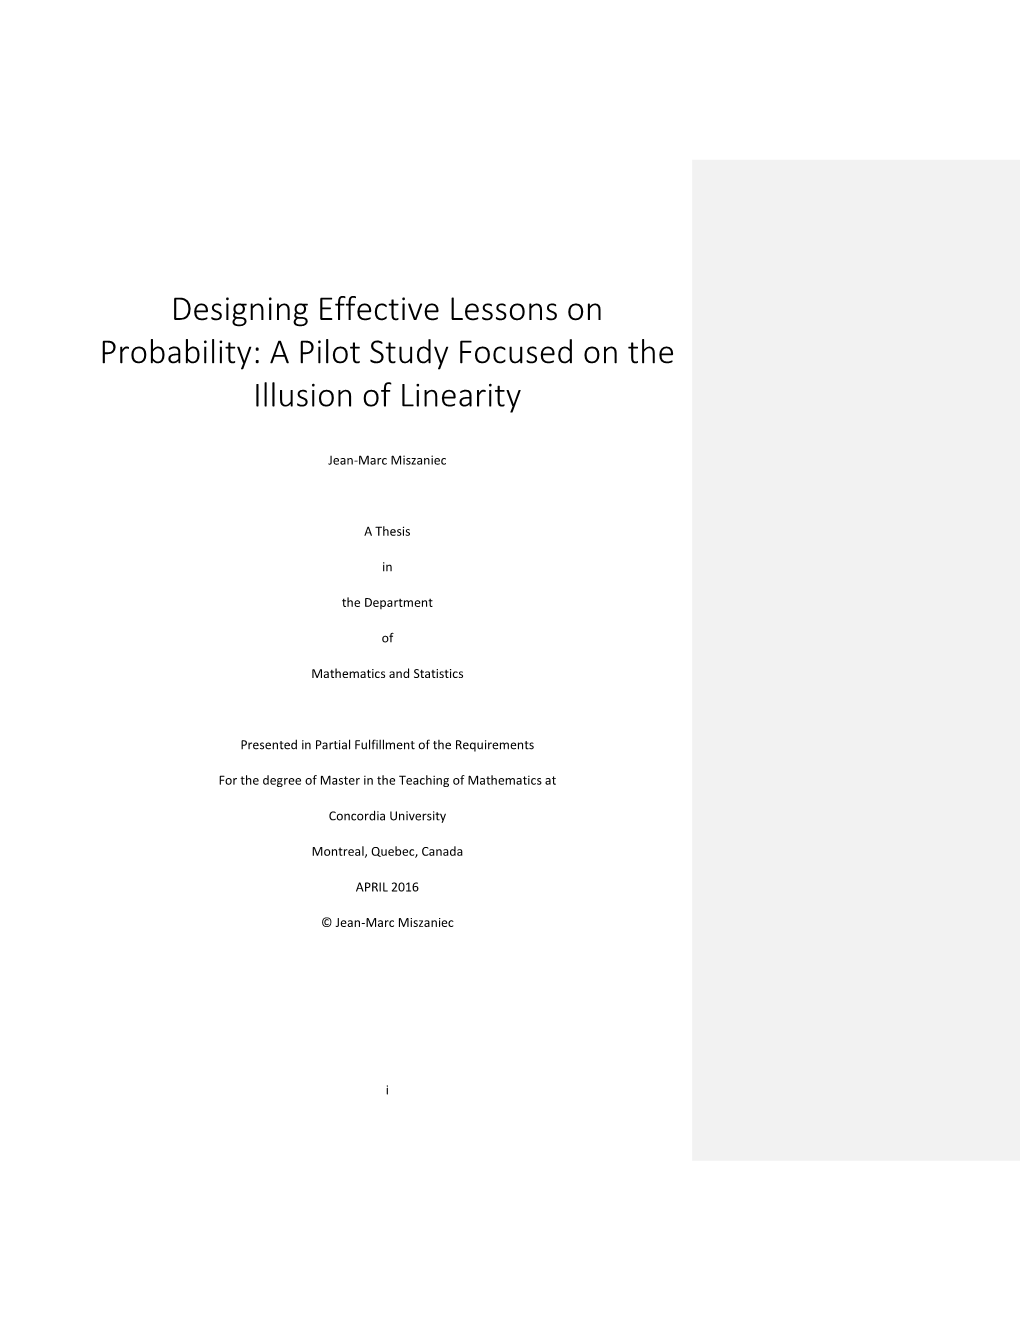 Designing Effective Lessons on Probability: a Pilot Study Focused on the Illusion of Linearity